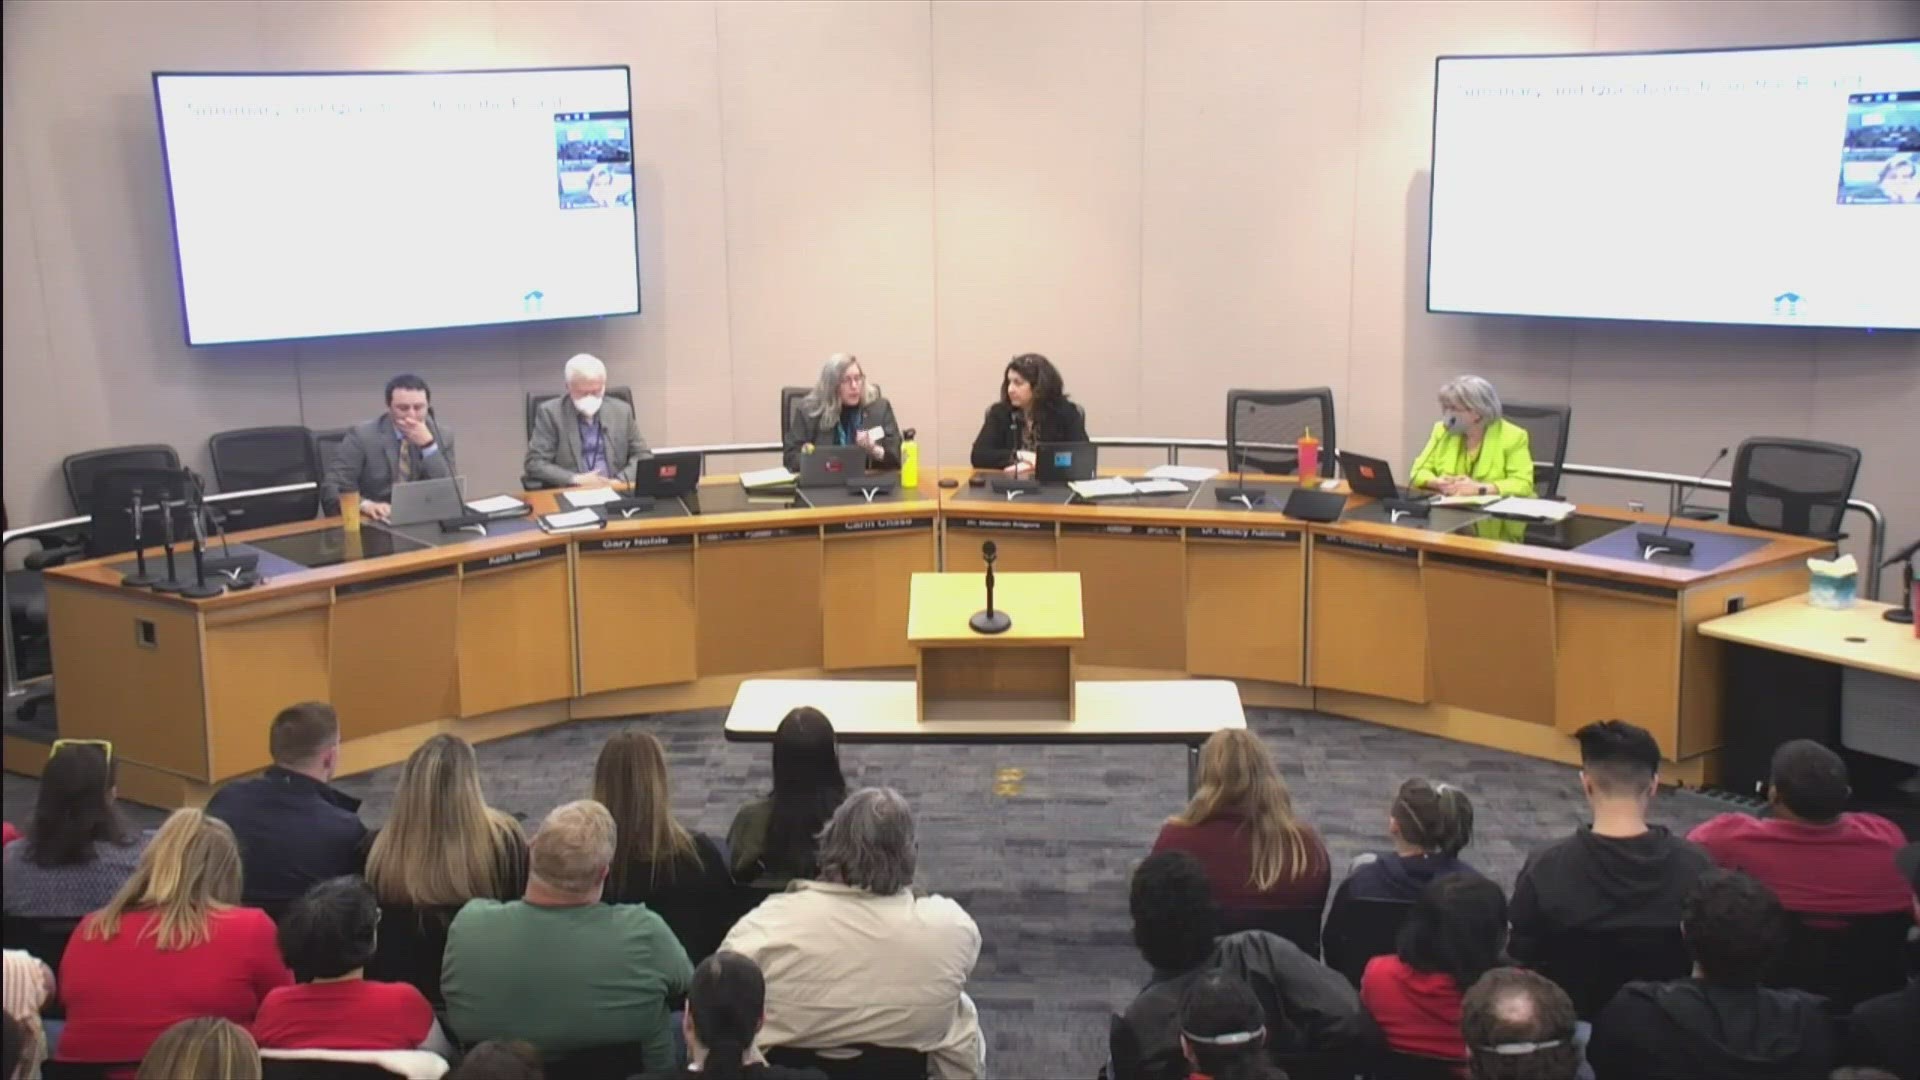 The Edmonds School District said it's facing a $15 million budget shortfall. About 50 teaching positions and some student programs are among the proposed cuts.